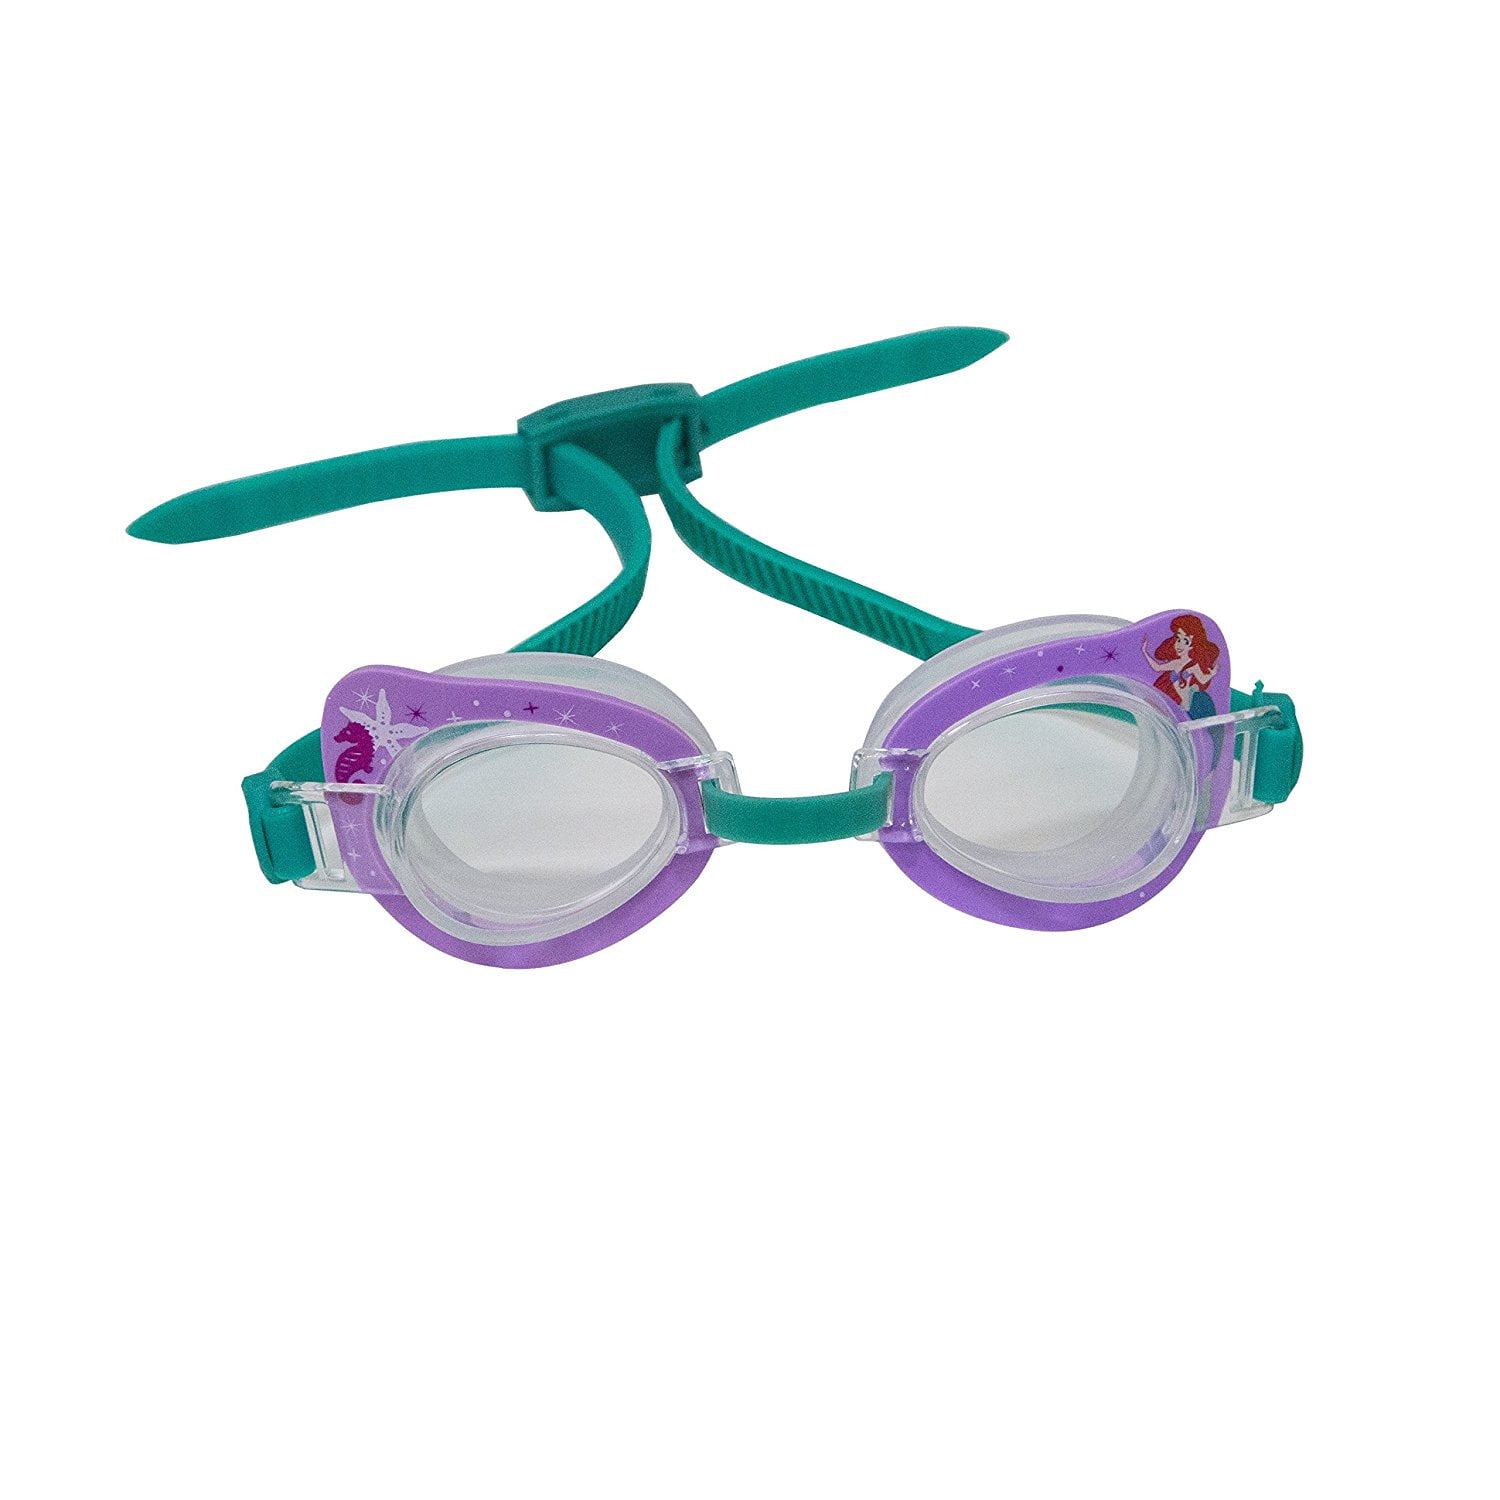 Details about   Disney Minnie Mouse Swim Goggles Swimwear Eye Protection New Daisy Duck 